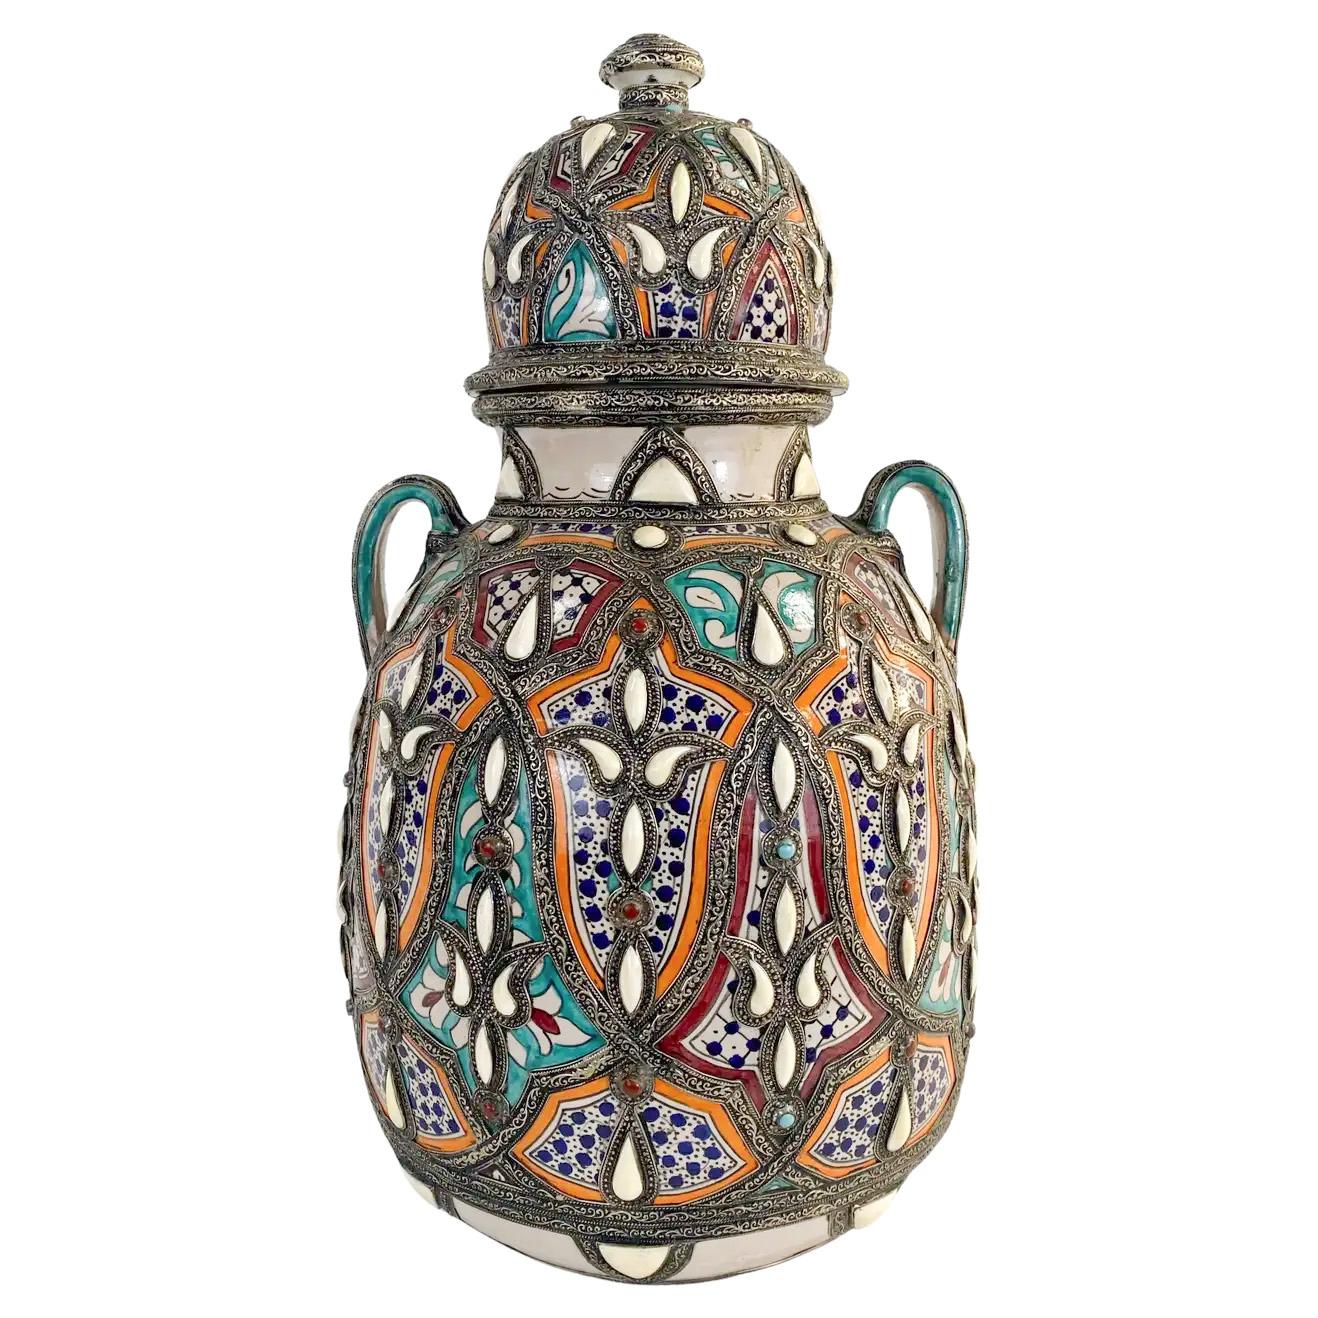 A pair of 1970's Moroccan hand made palatial lidded vases with an entrancing and elaborate design scheme, brass frame and the sculptural grace that only master artisans can provide, this large vase is a statement-worthy addition to any living space.